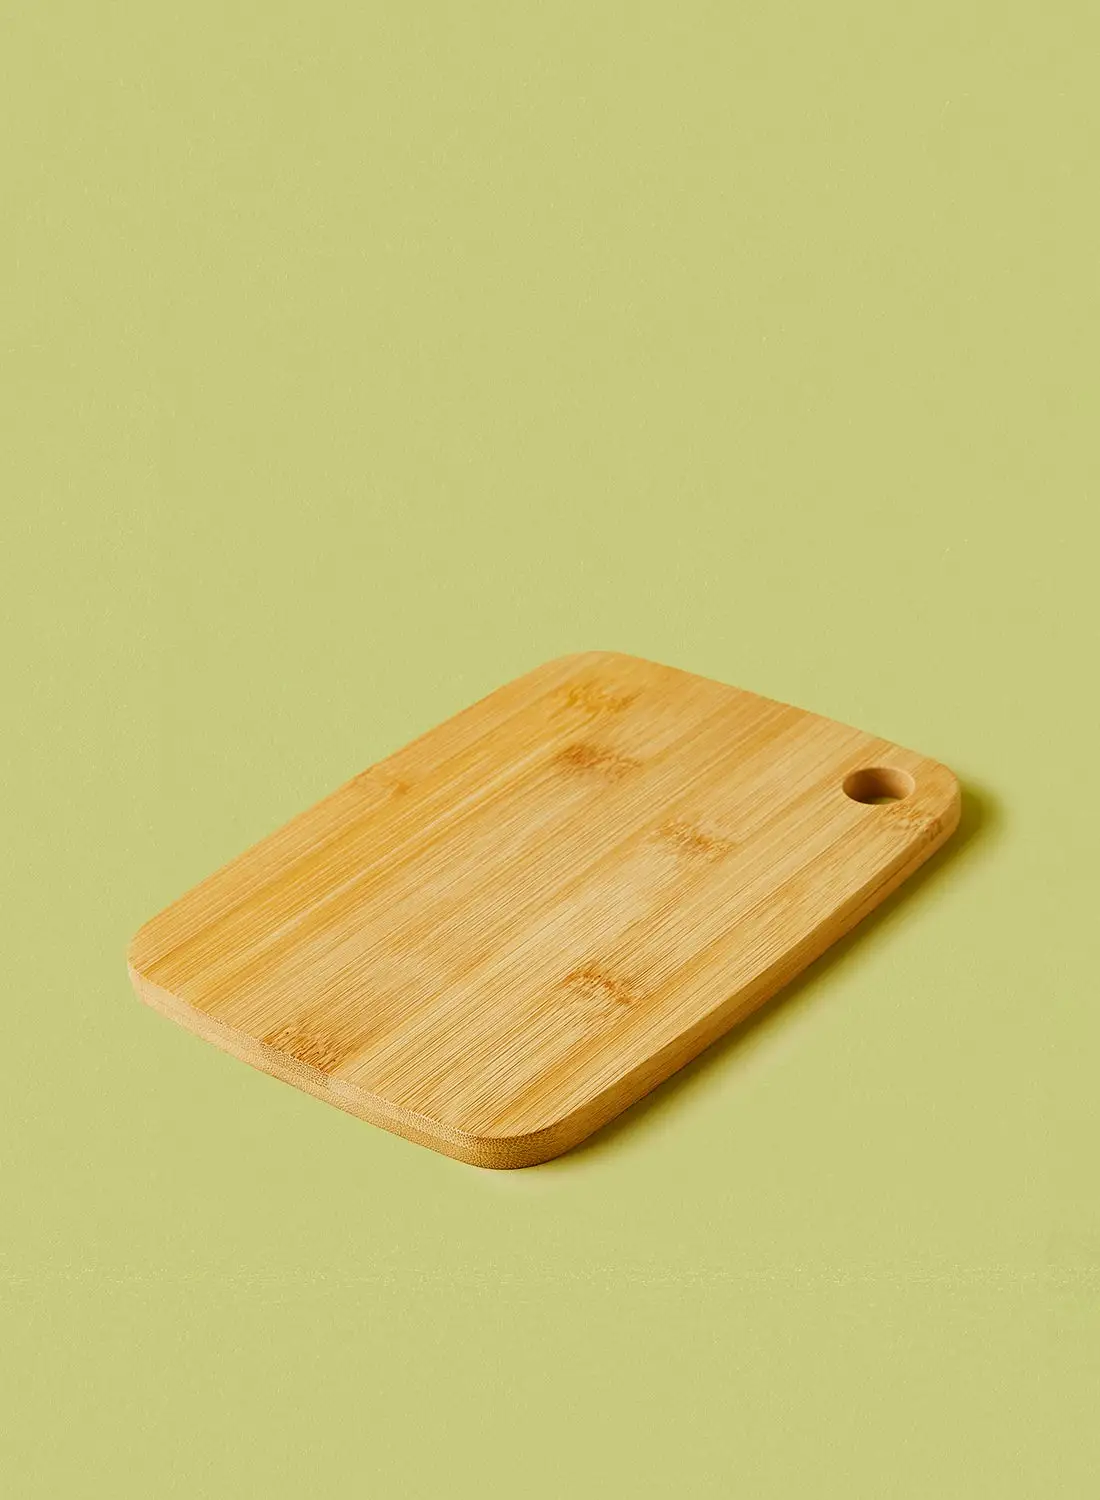 noon east Cutting Board - Made Of Wooden - For Cutting And Chopping Vegetables And Fruits - Chopping Board - Chopping Board - Plank - Kitchen Tools - Fruits - Brown